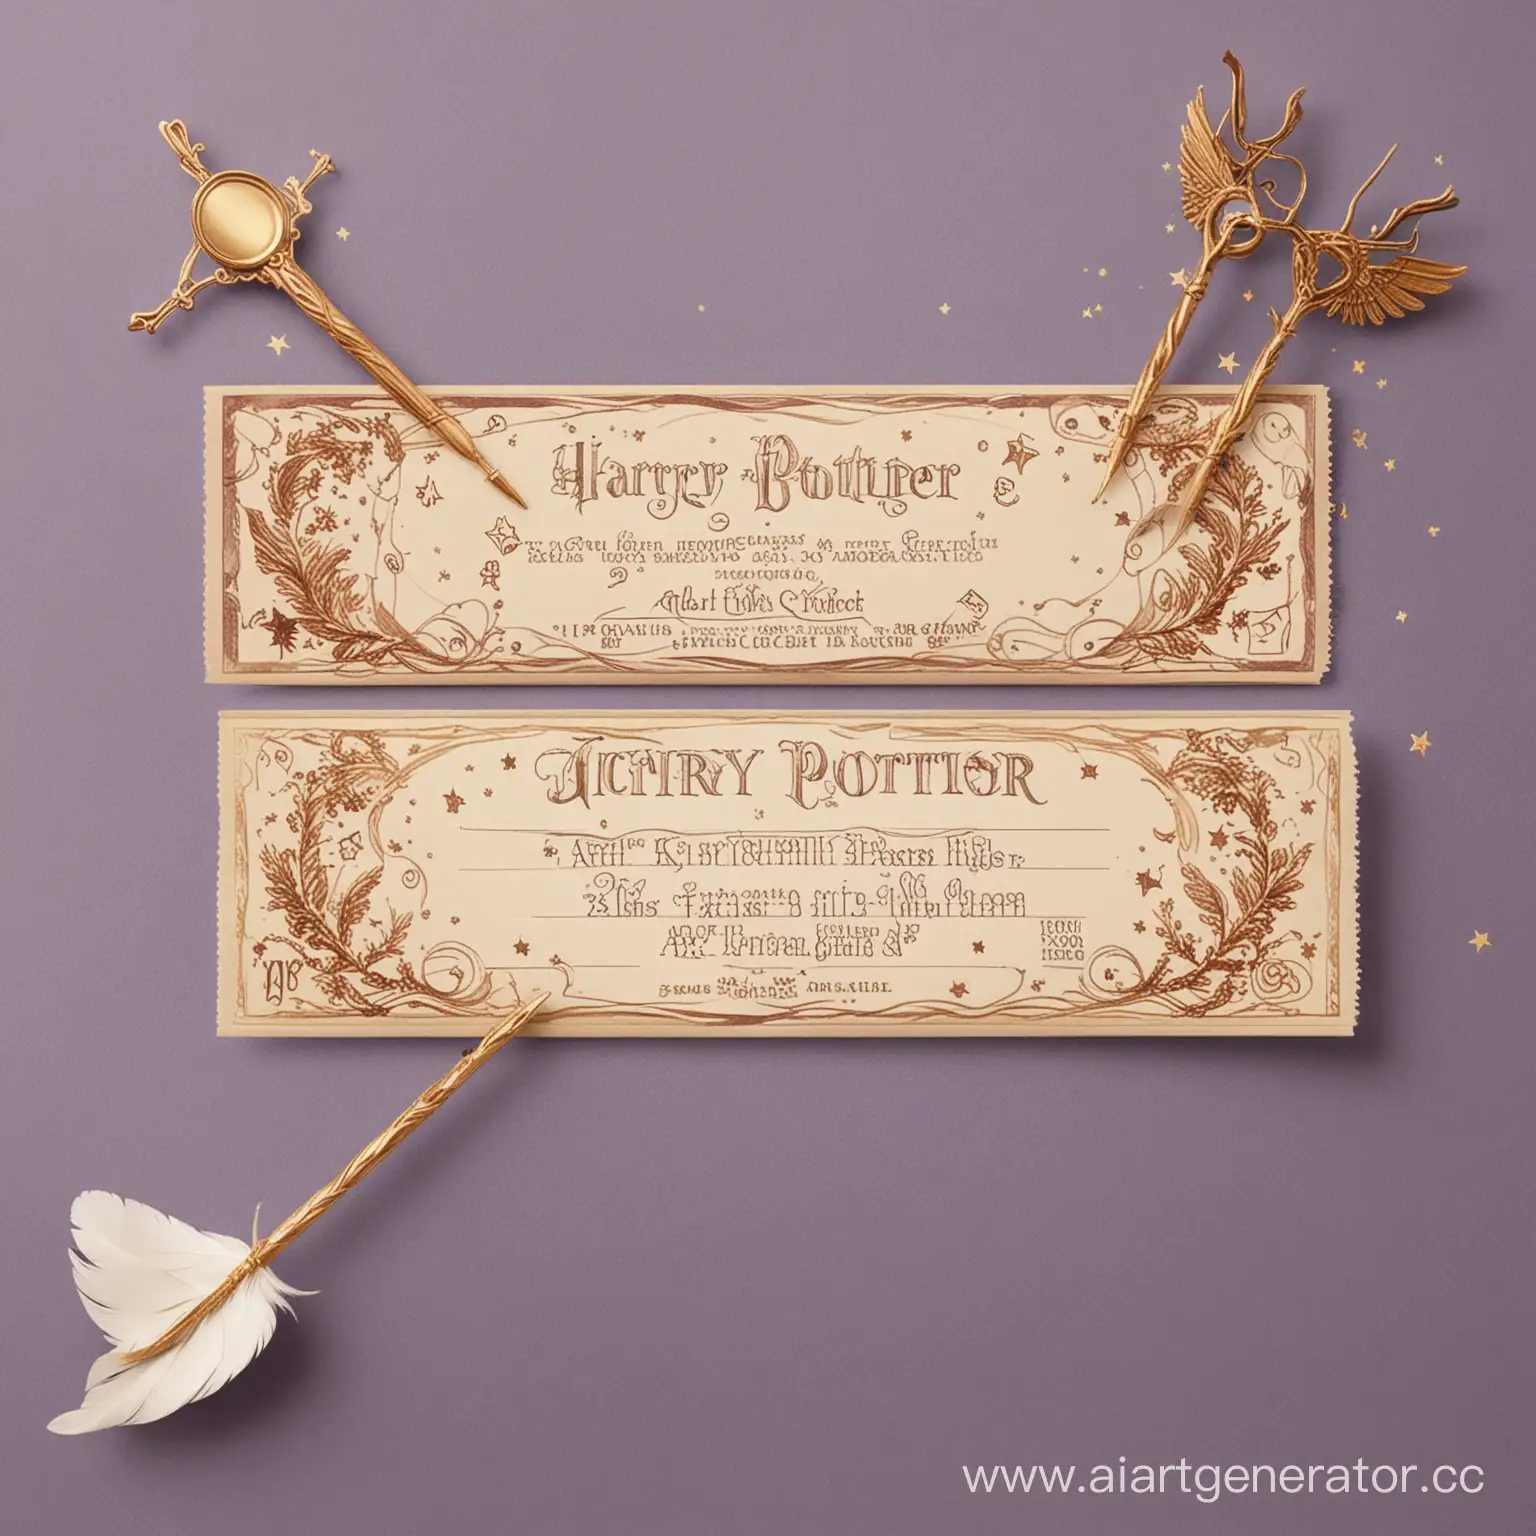 Magical-Wedding-Invitation-Ticket-with-Harry-Potter-Symbolism-and-Elegant-Styling